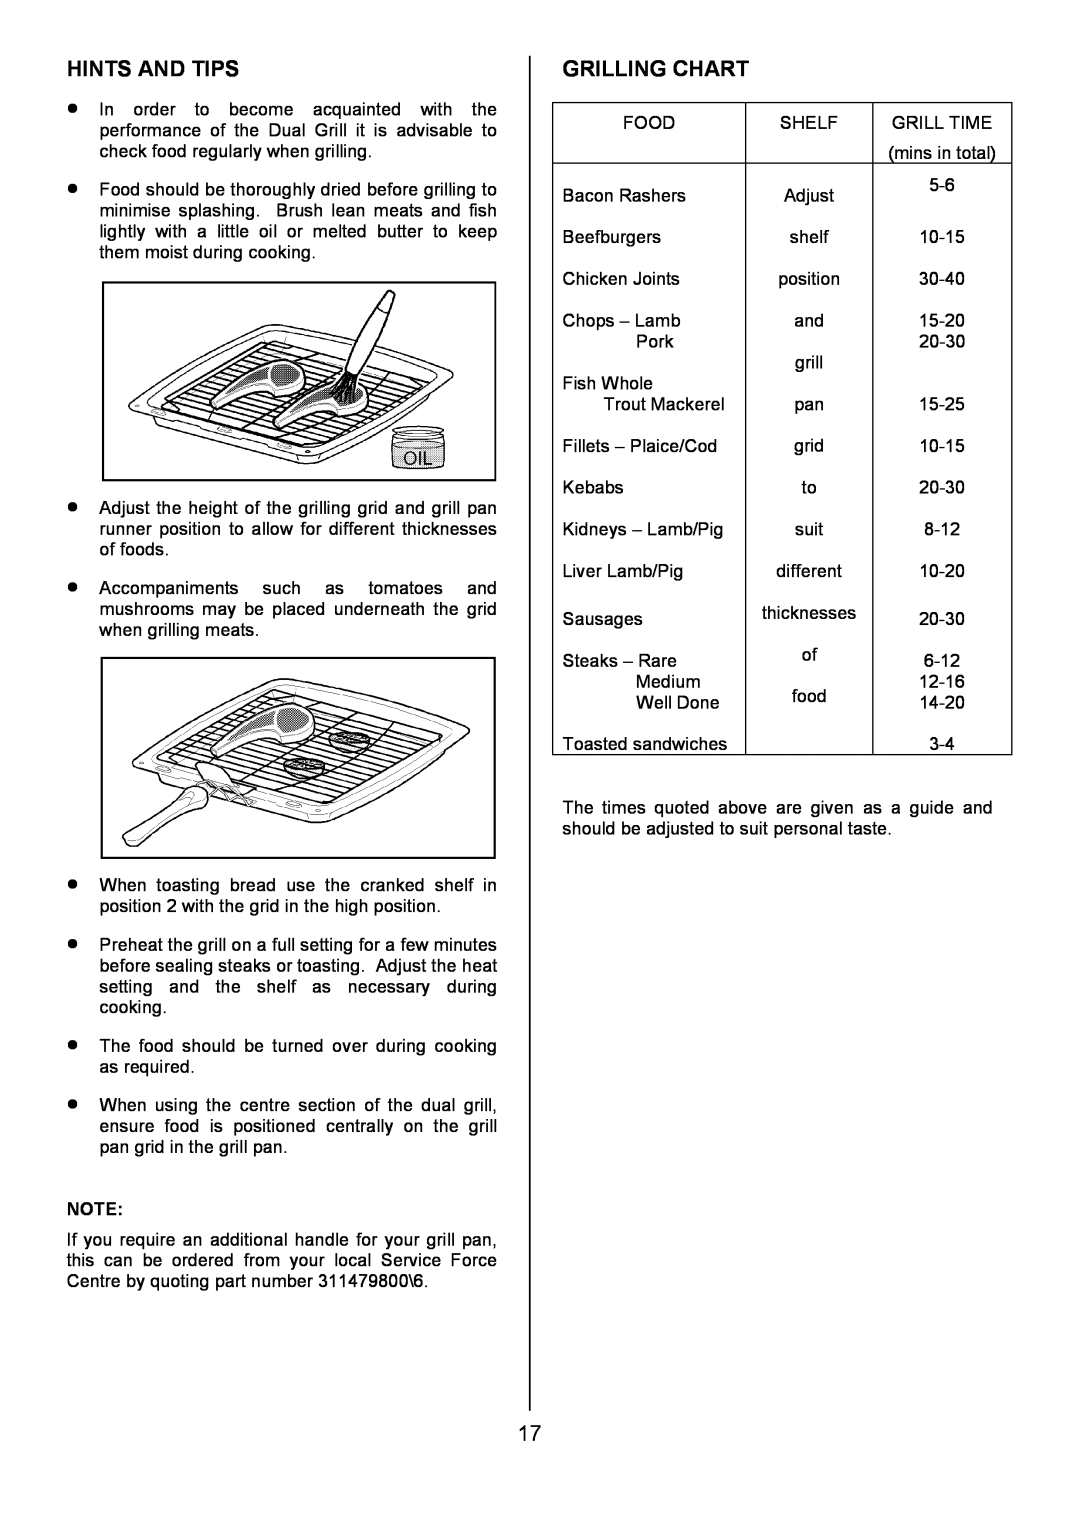 Tricity Bendix SIE531 installation instructions Grilling Chart, Hints And Tips, thicknesses 